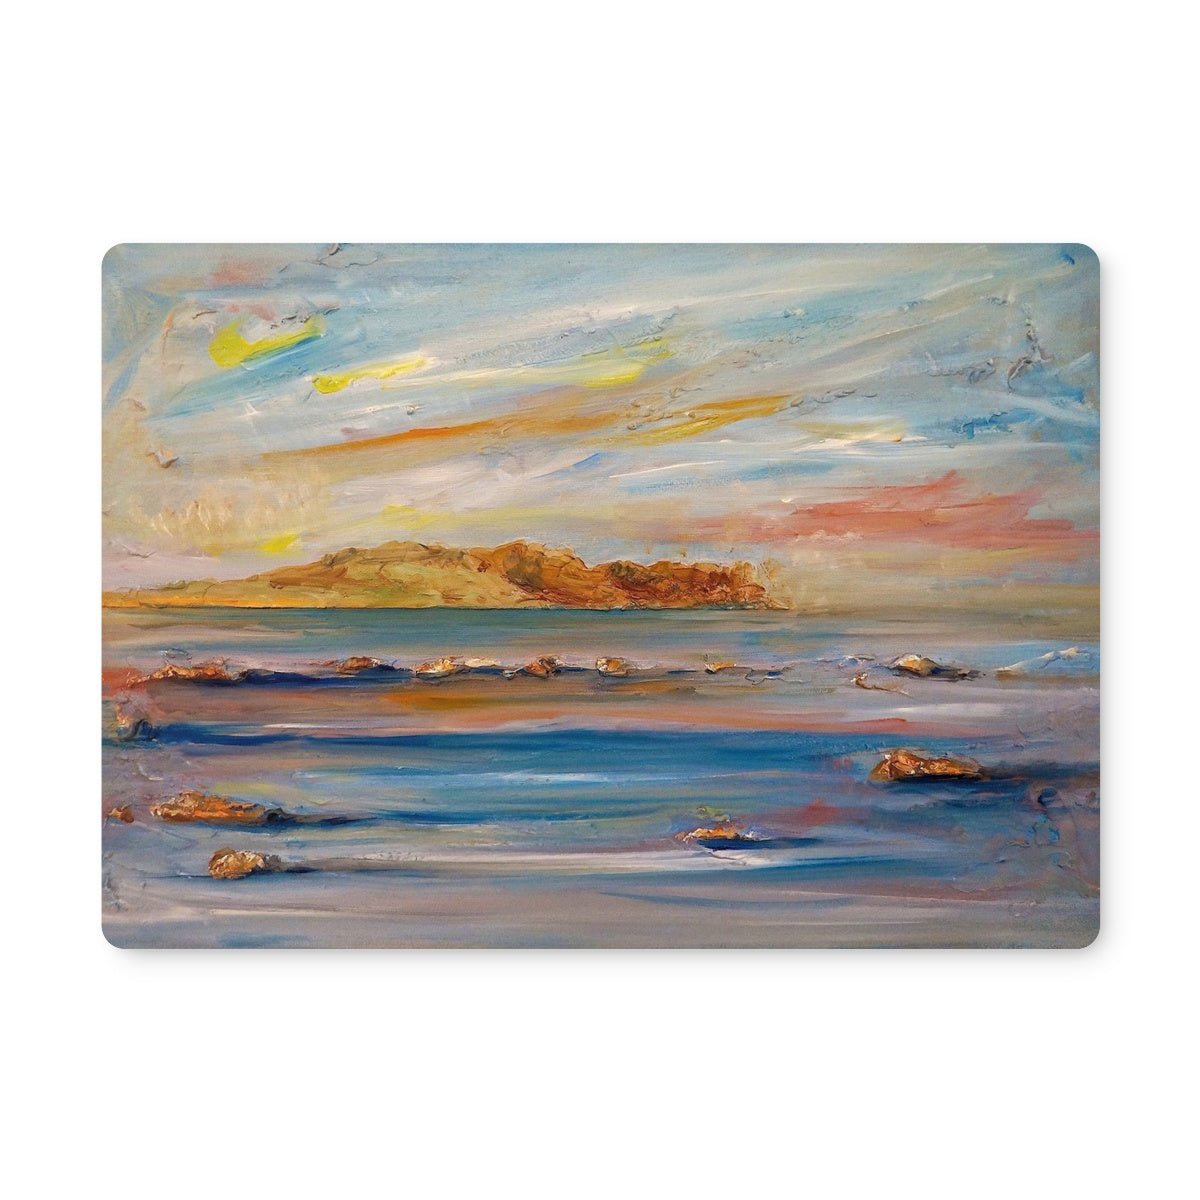 Tiree Dawn Art Gifts Placemat-Placemats-Hebridean Islands Art Gallery-6 Placemats-Paintings, Prints, Homeware, Art Gifts From Scotland By Scottish Artist Kevin Hunter